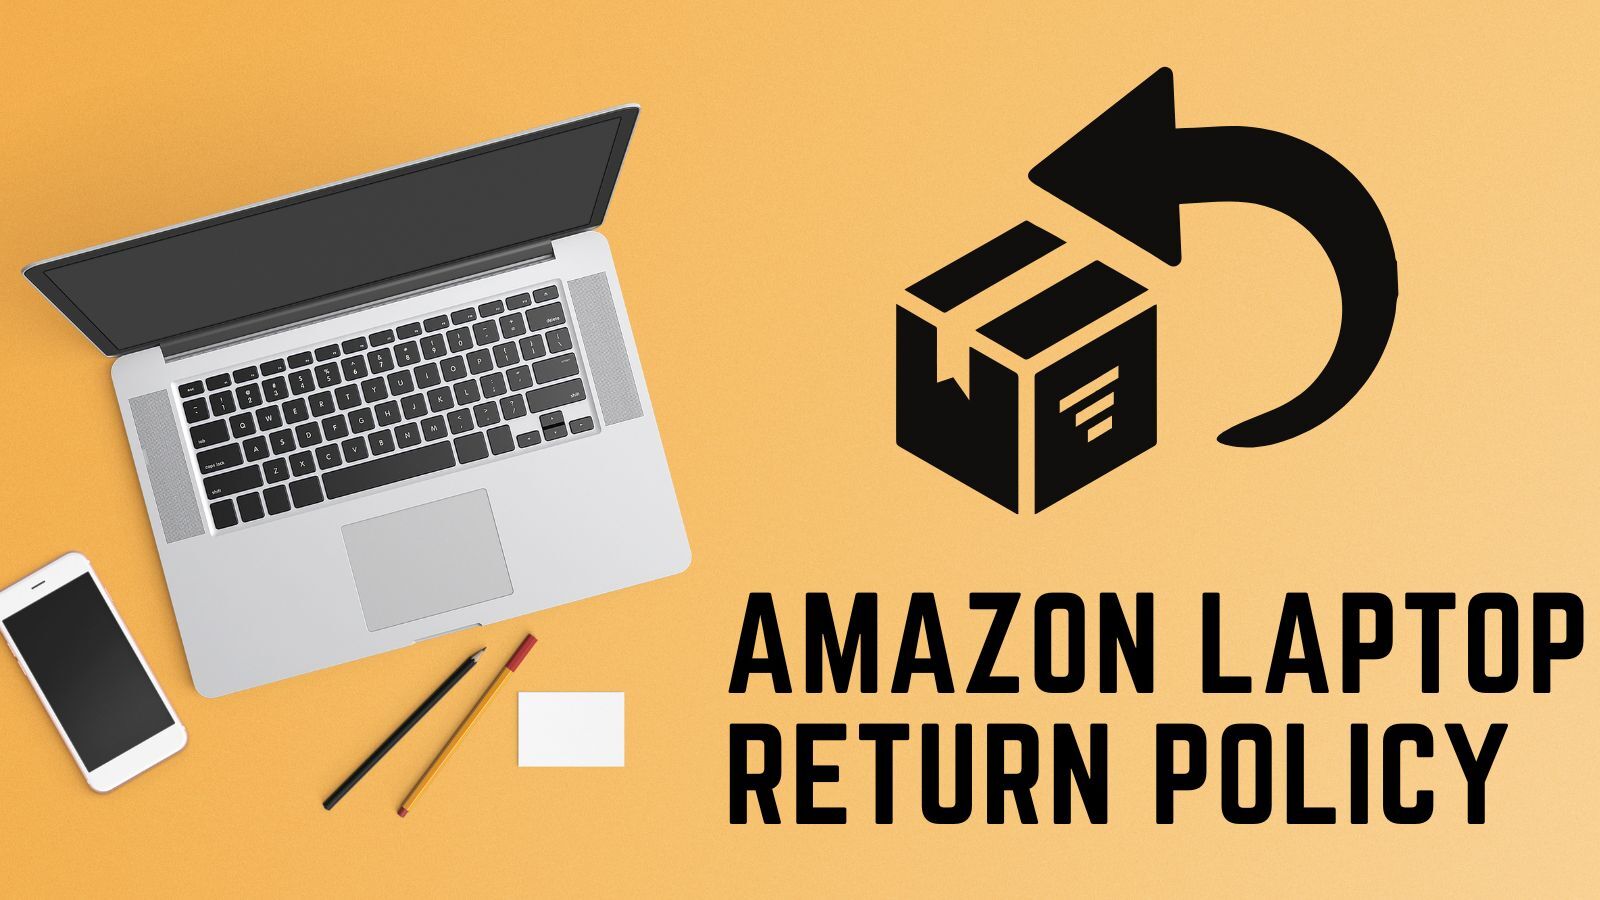 Amazon Laptop Return Policy (All You Need to Know!) Cherry Picks